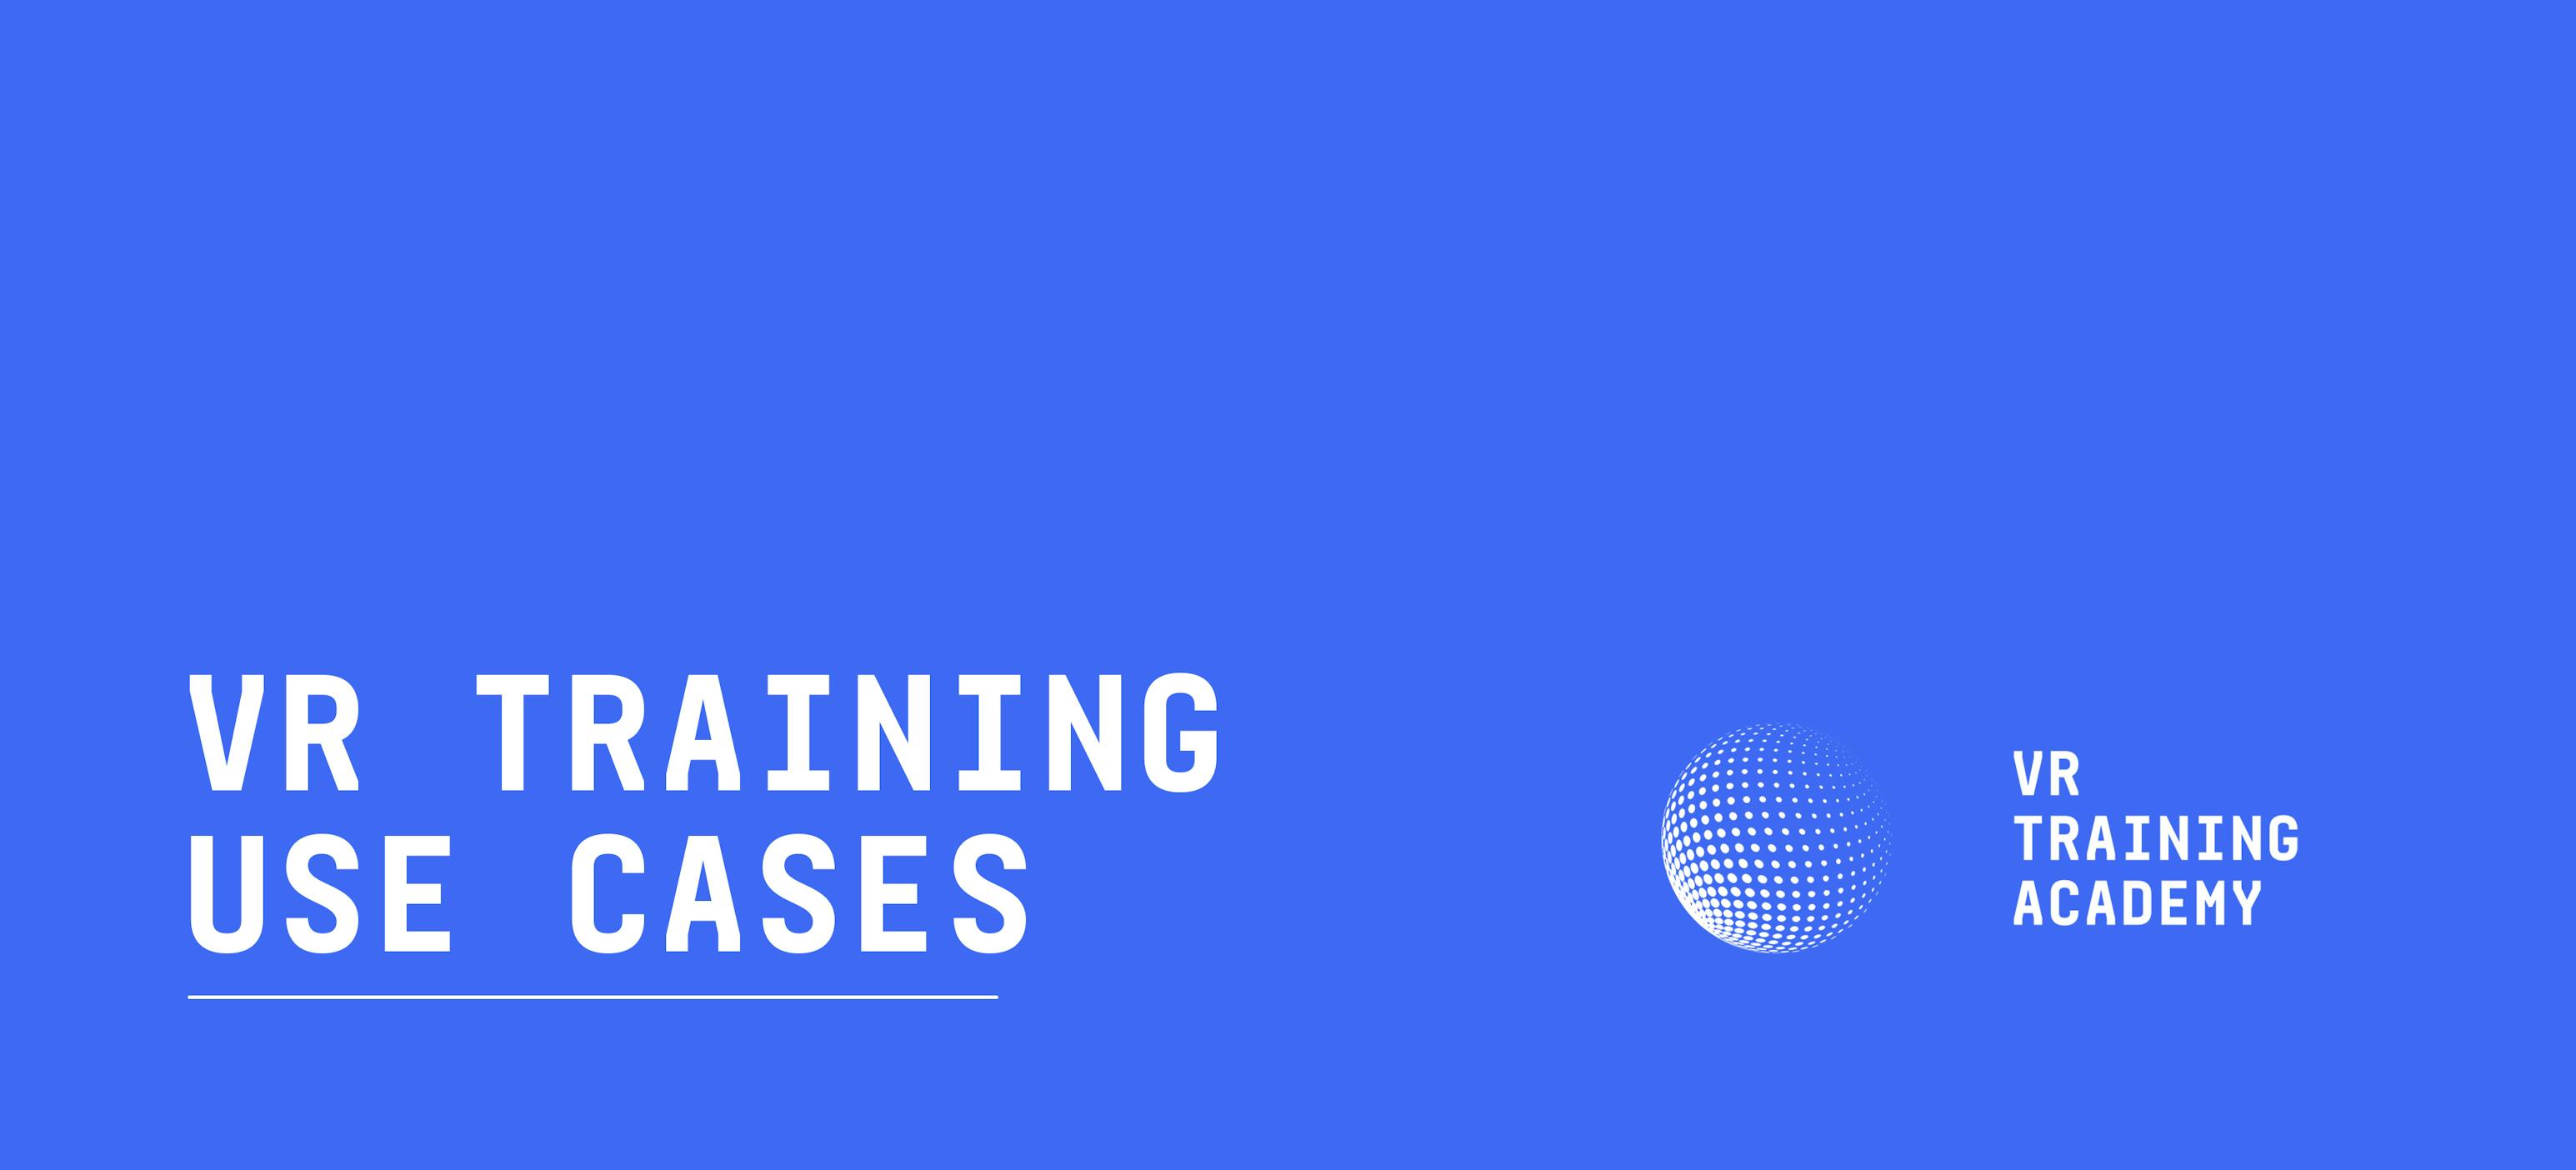 Thumbnail VR Training Academy Cases